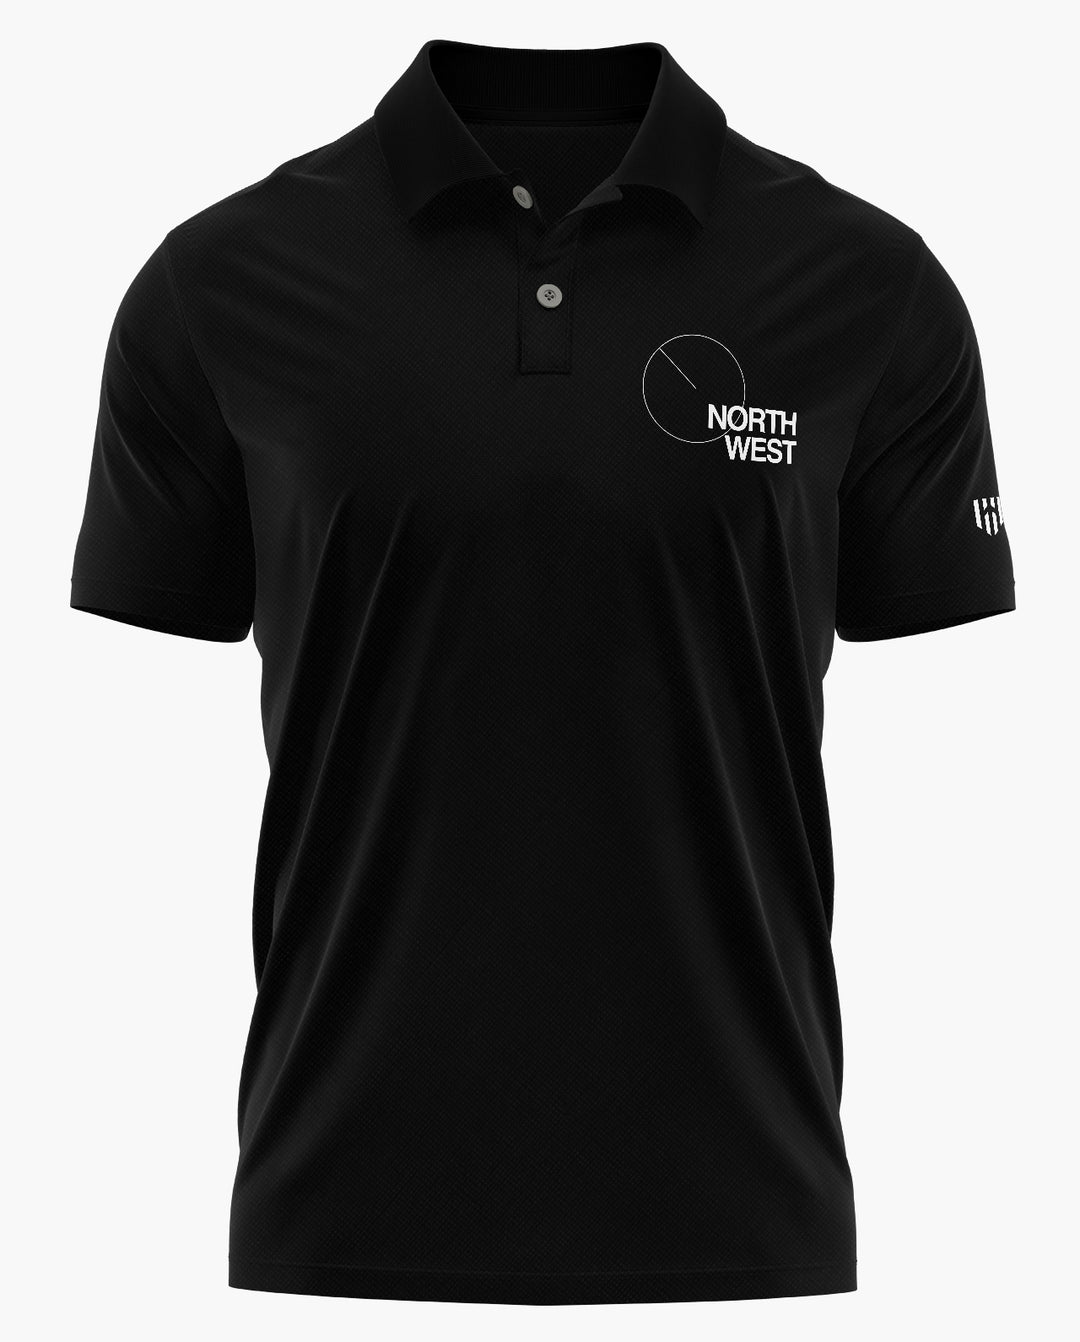 Direction North West Polo T-Shirt - Aero Armour